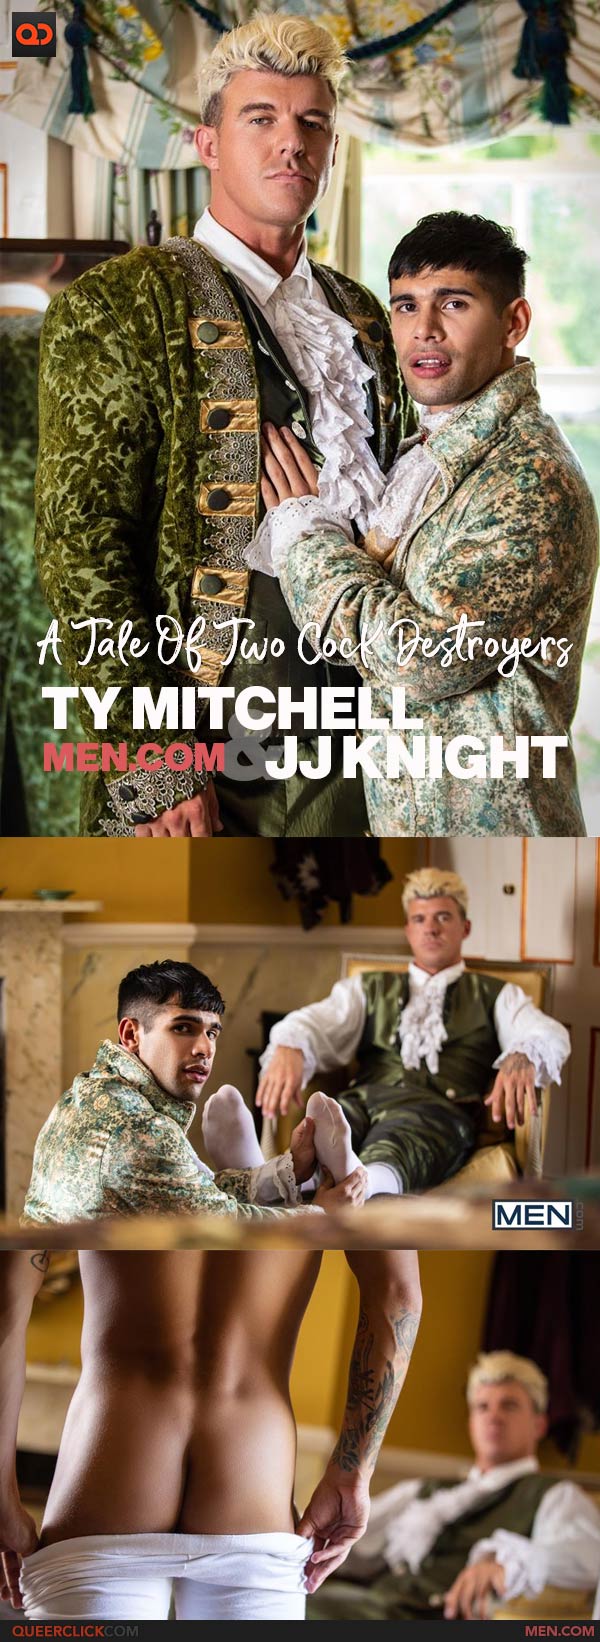 Men.com: A Tale Of Two Cock Destroyers Episode 1 – JJ Knight and Ty Mitchell